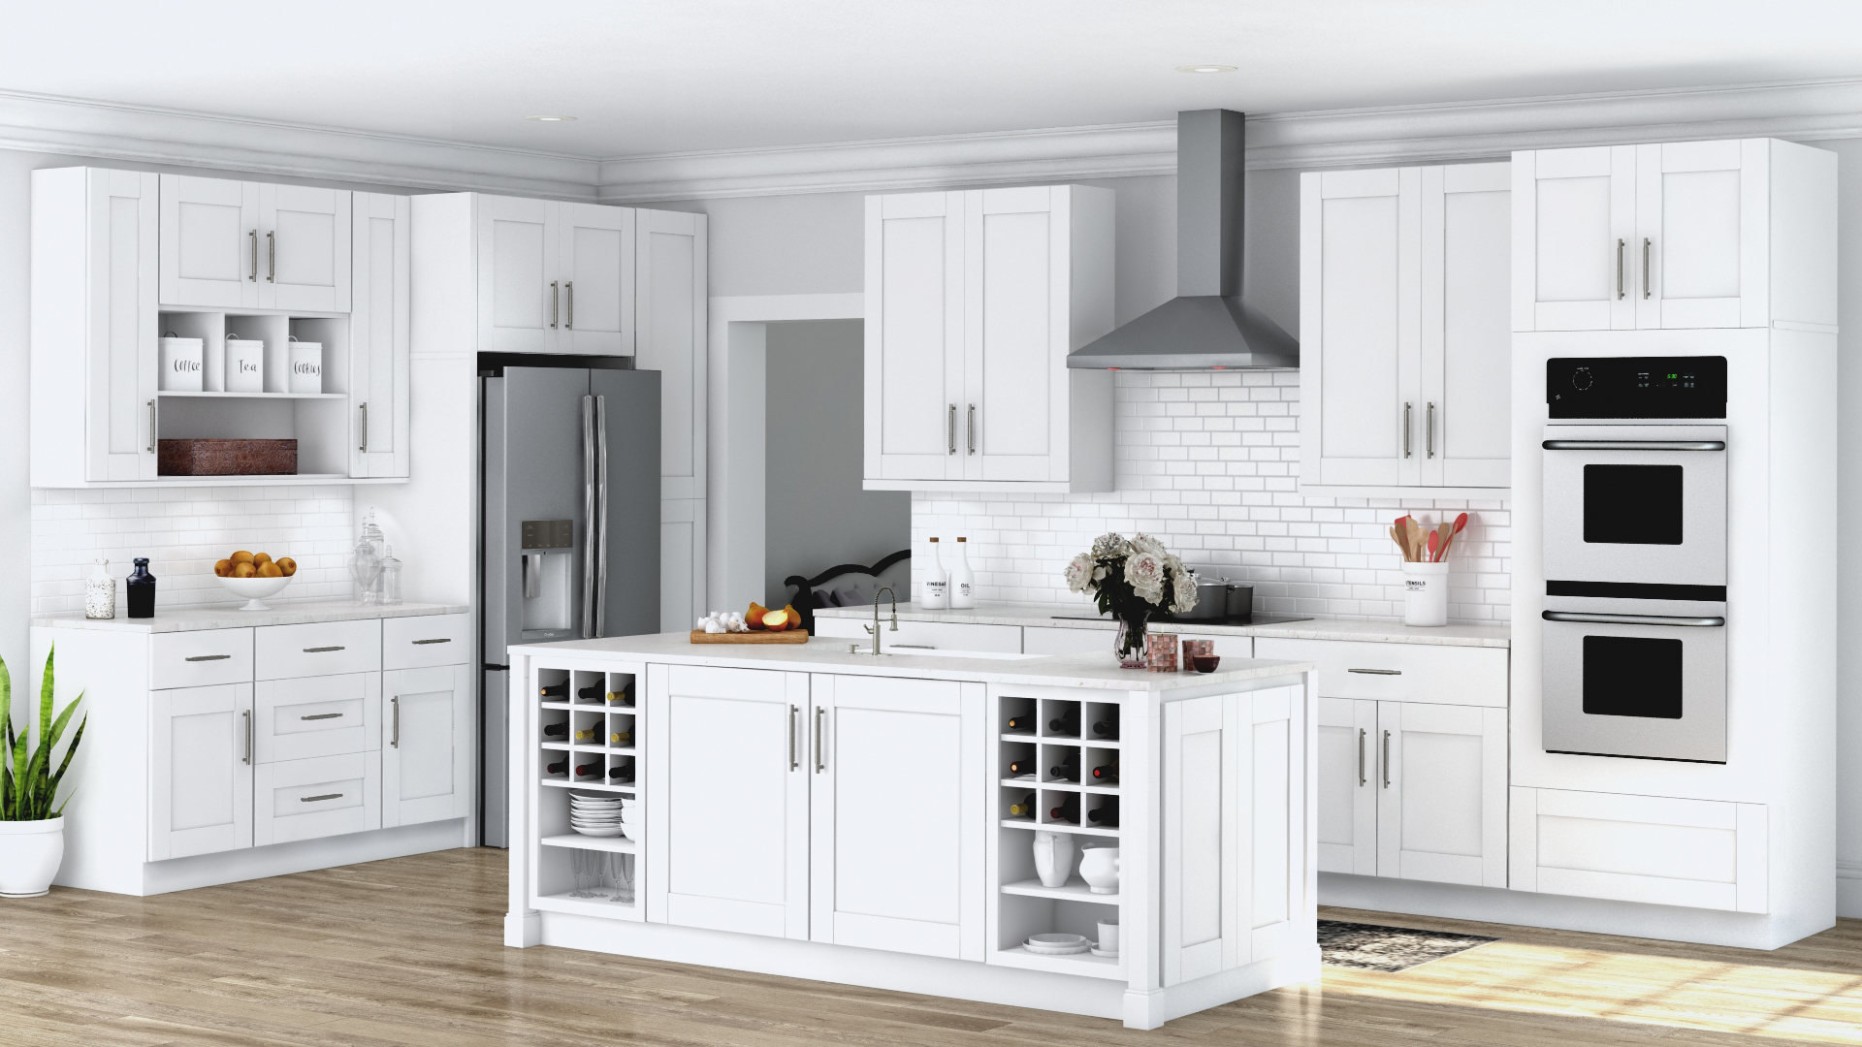 Shaker Wall Cabinets in White – Kitchen – The Home Depot - white kitchen cabinets